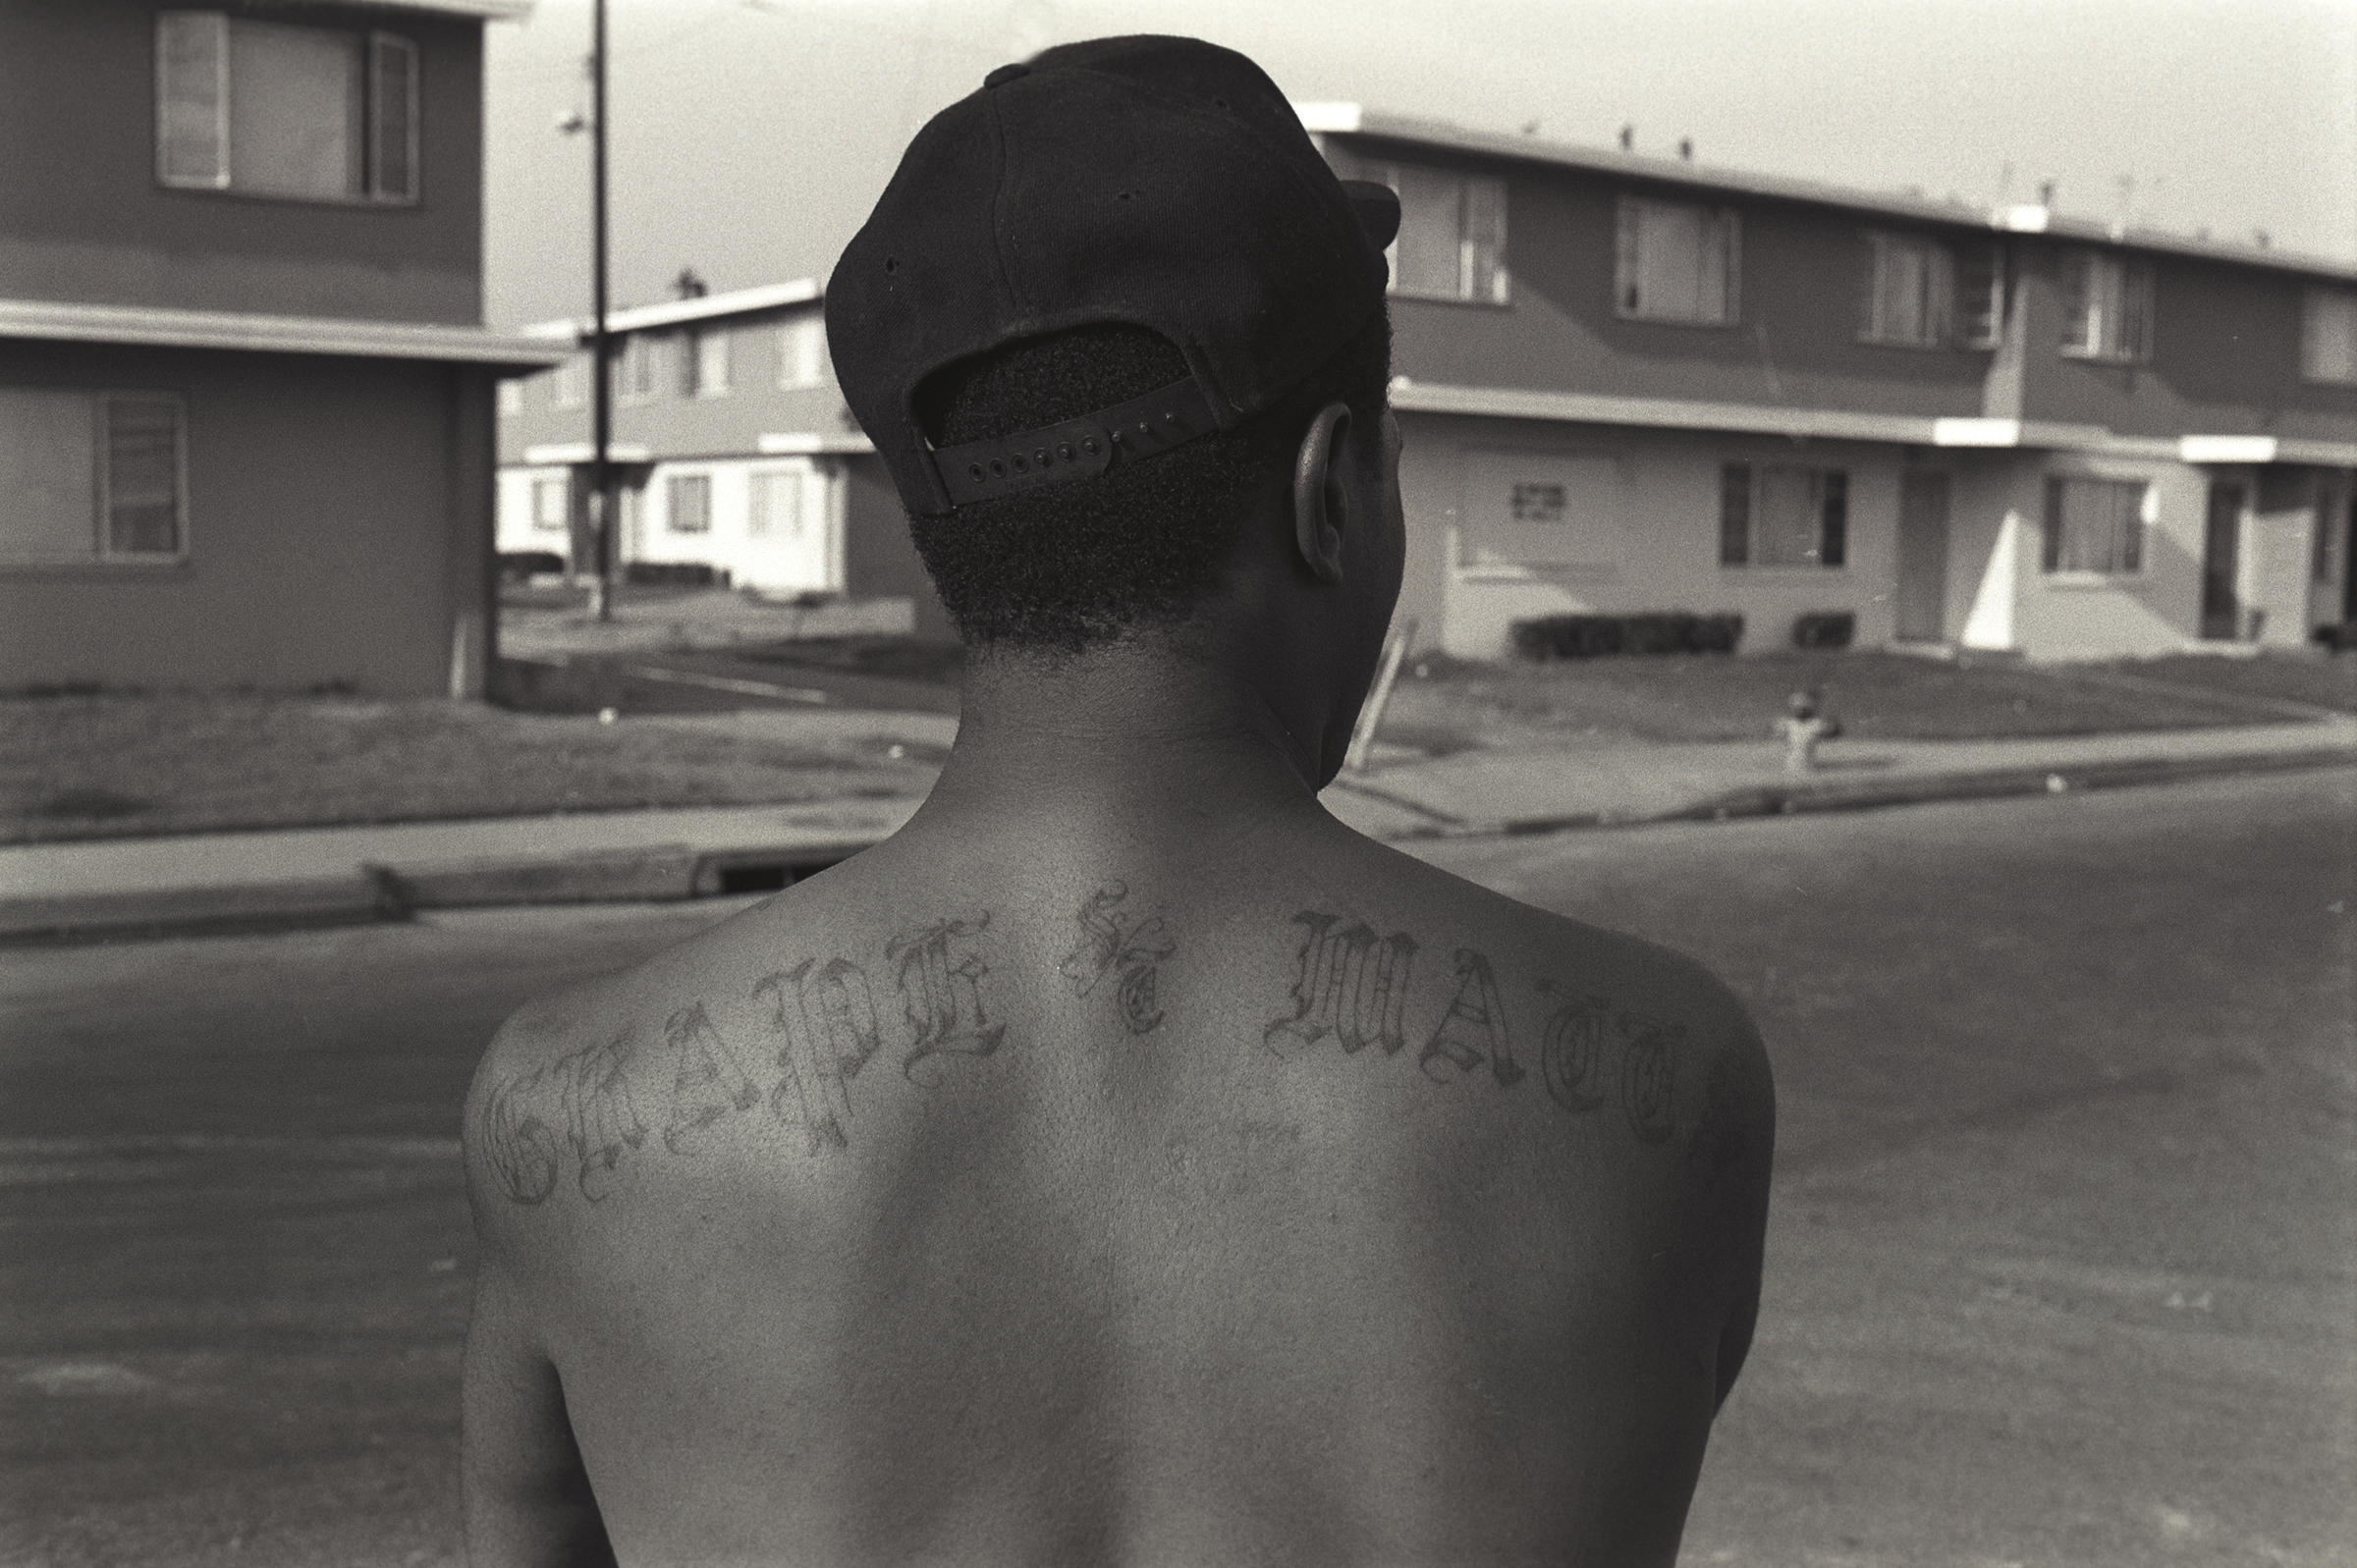 An OG, or "original gangster," member of the Grape Street Crips shows off his tattoo.